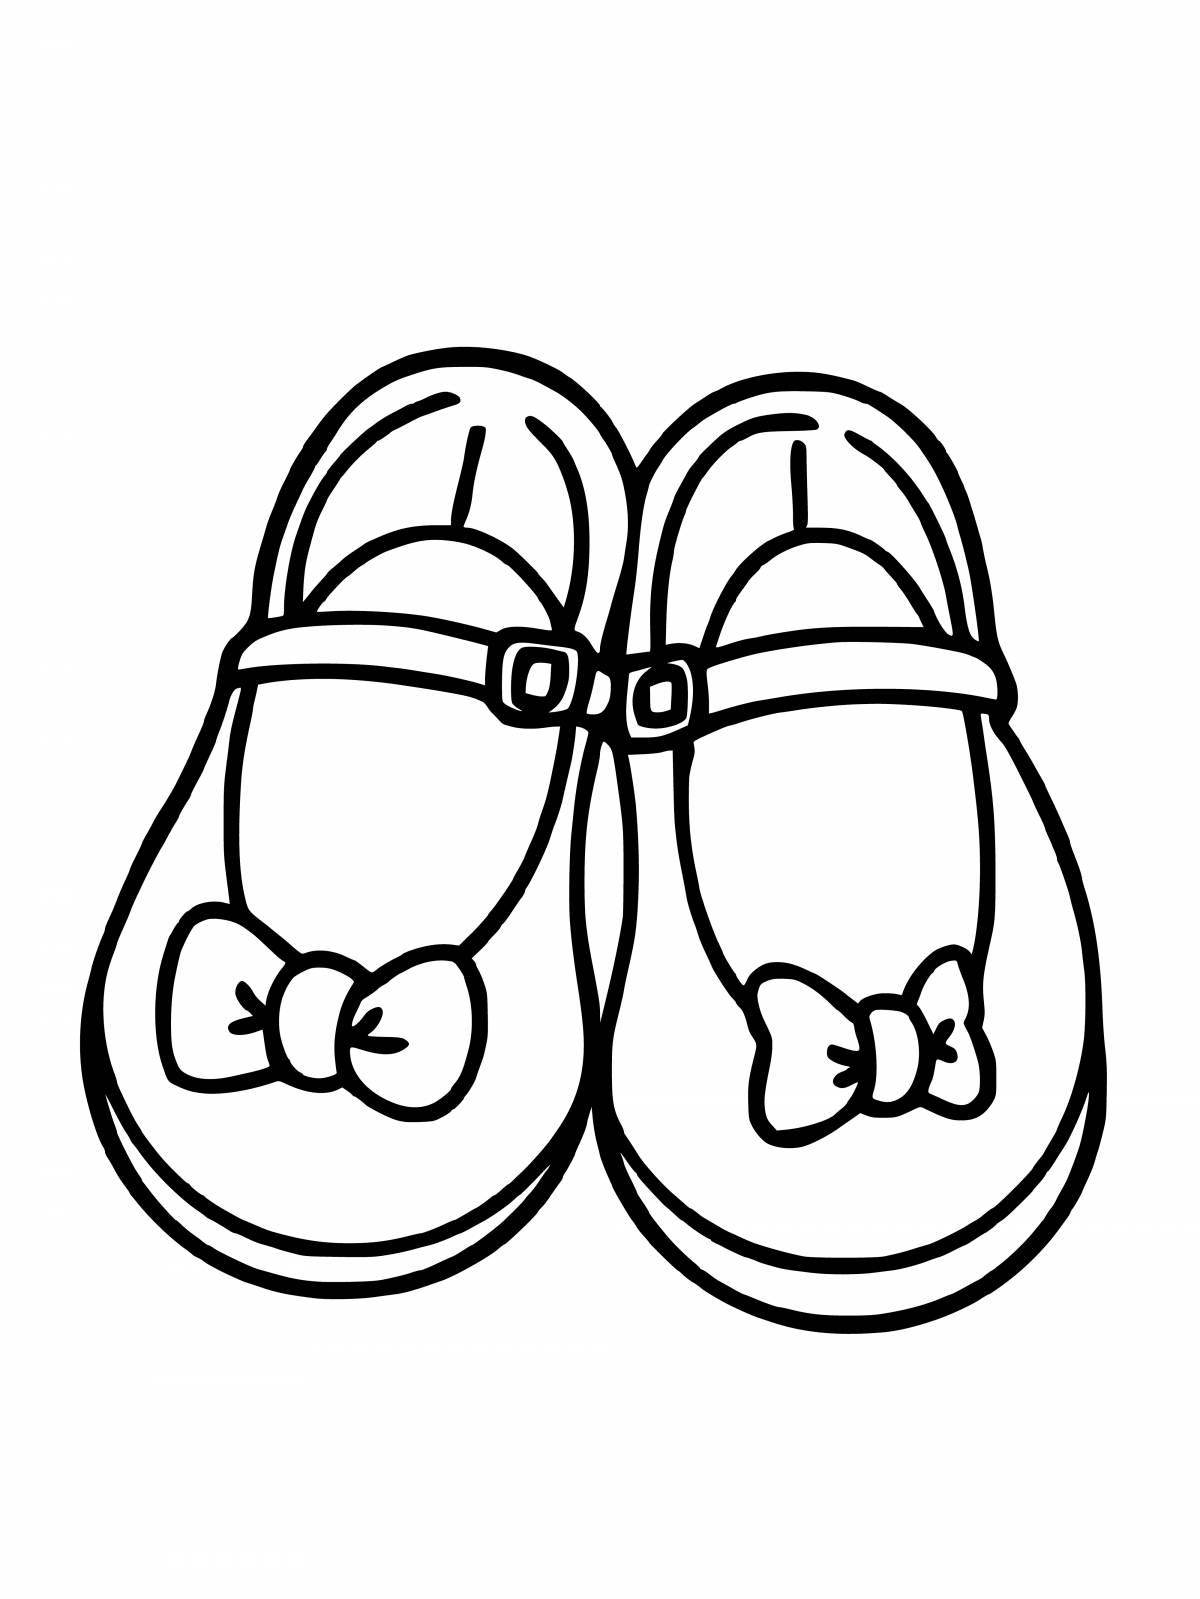 Coloring page playful children's shoes